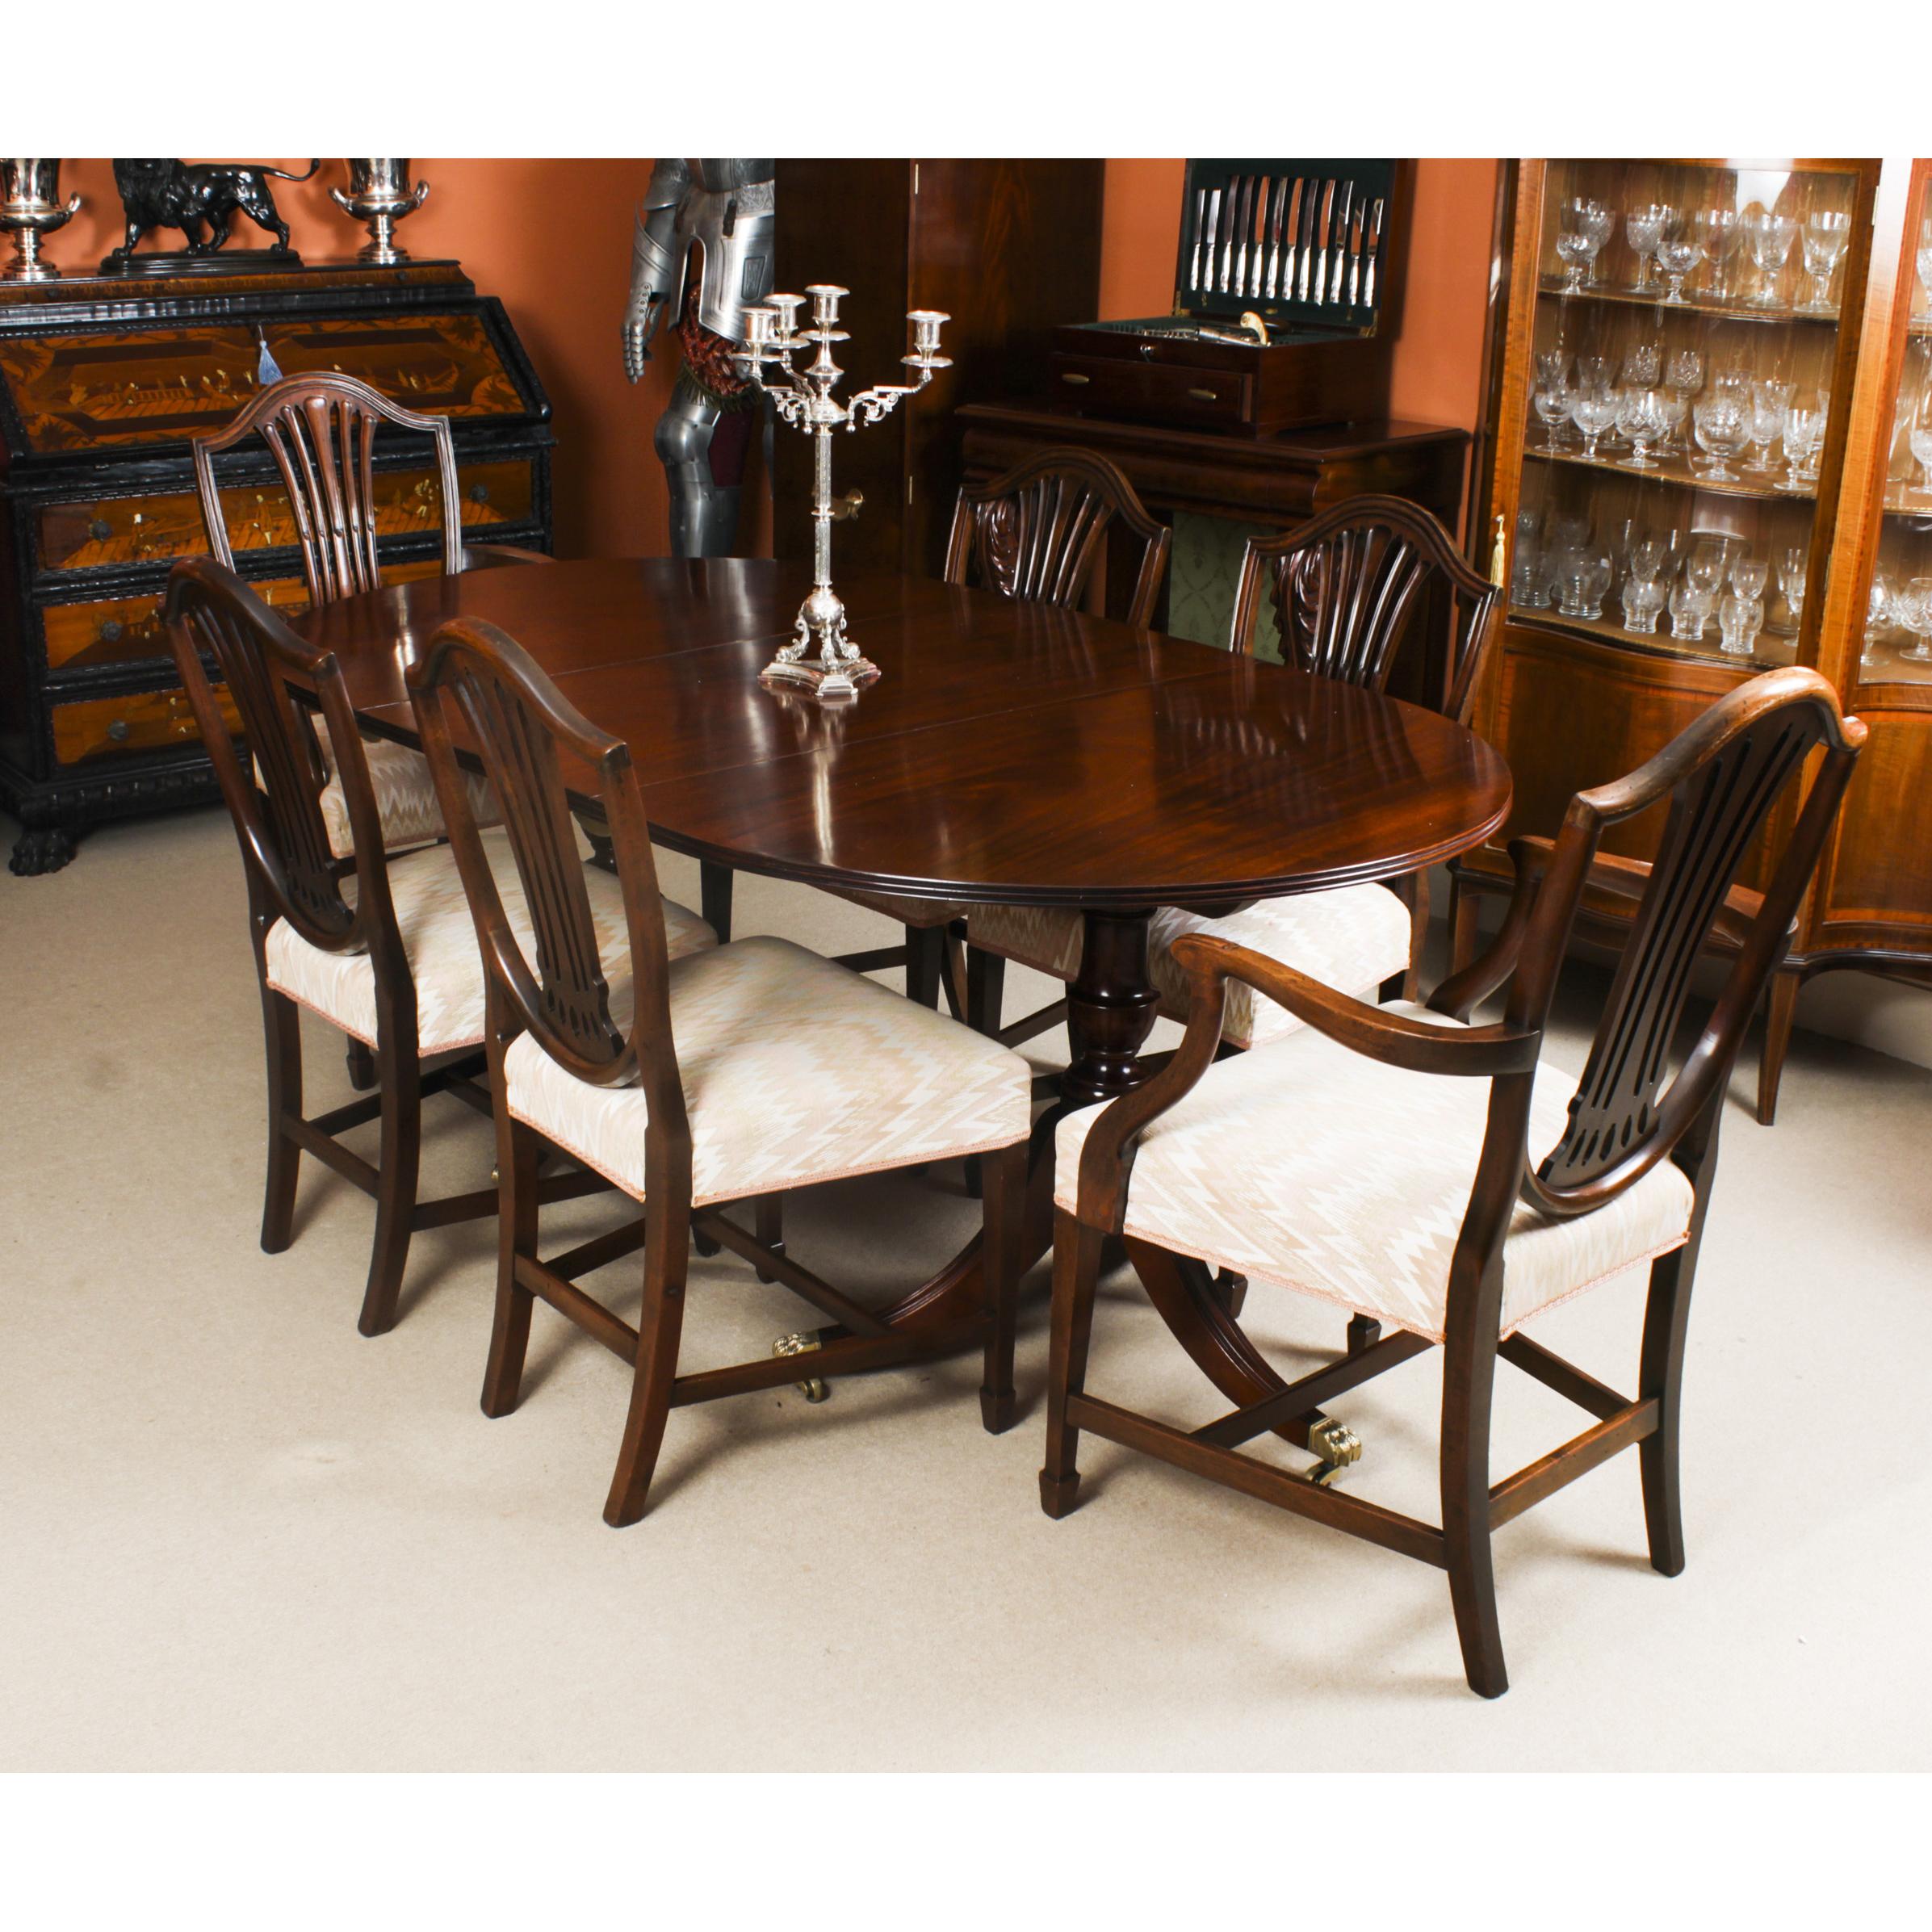 This is an elegant dining set comprising an antique Regency dining table C1830 in date with a set of six Shield back dining chairs.

The table is of oval form with reeded edge. It is raised on twin urnular pillars with triple swept sabre leg bases